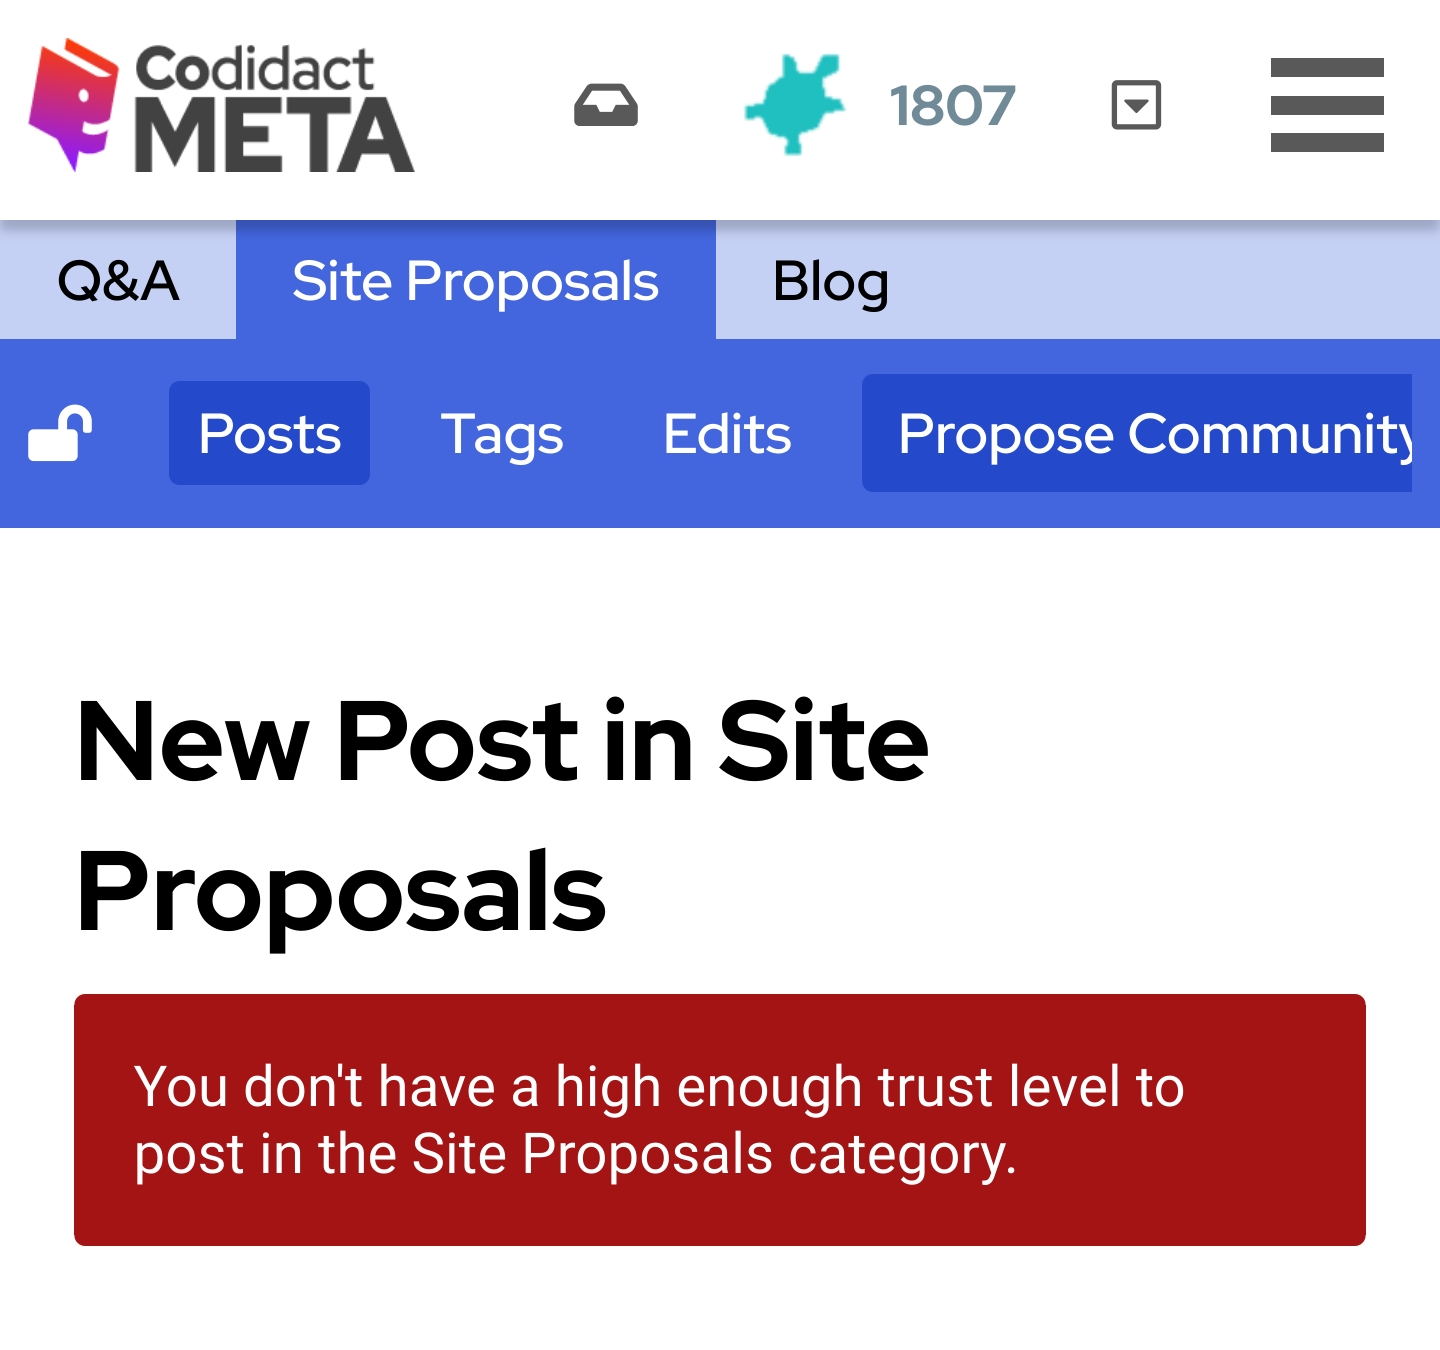 Site Proposals category showing a red error message "You don't have a high enough trust level to post in the Site Proposals category"